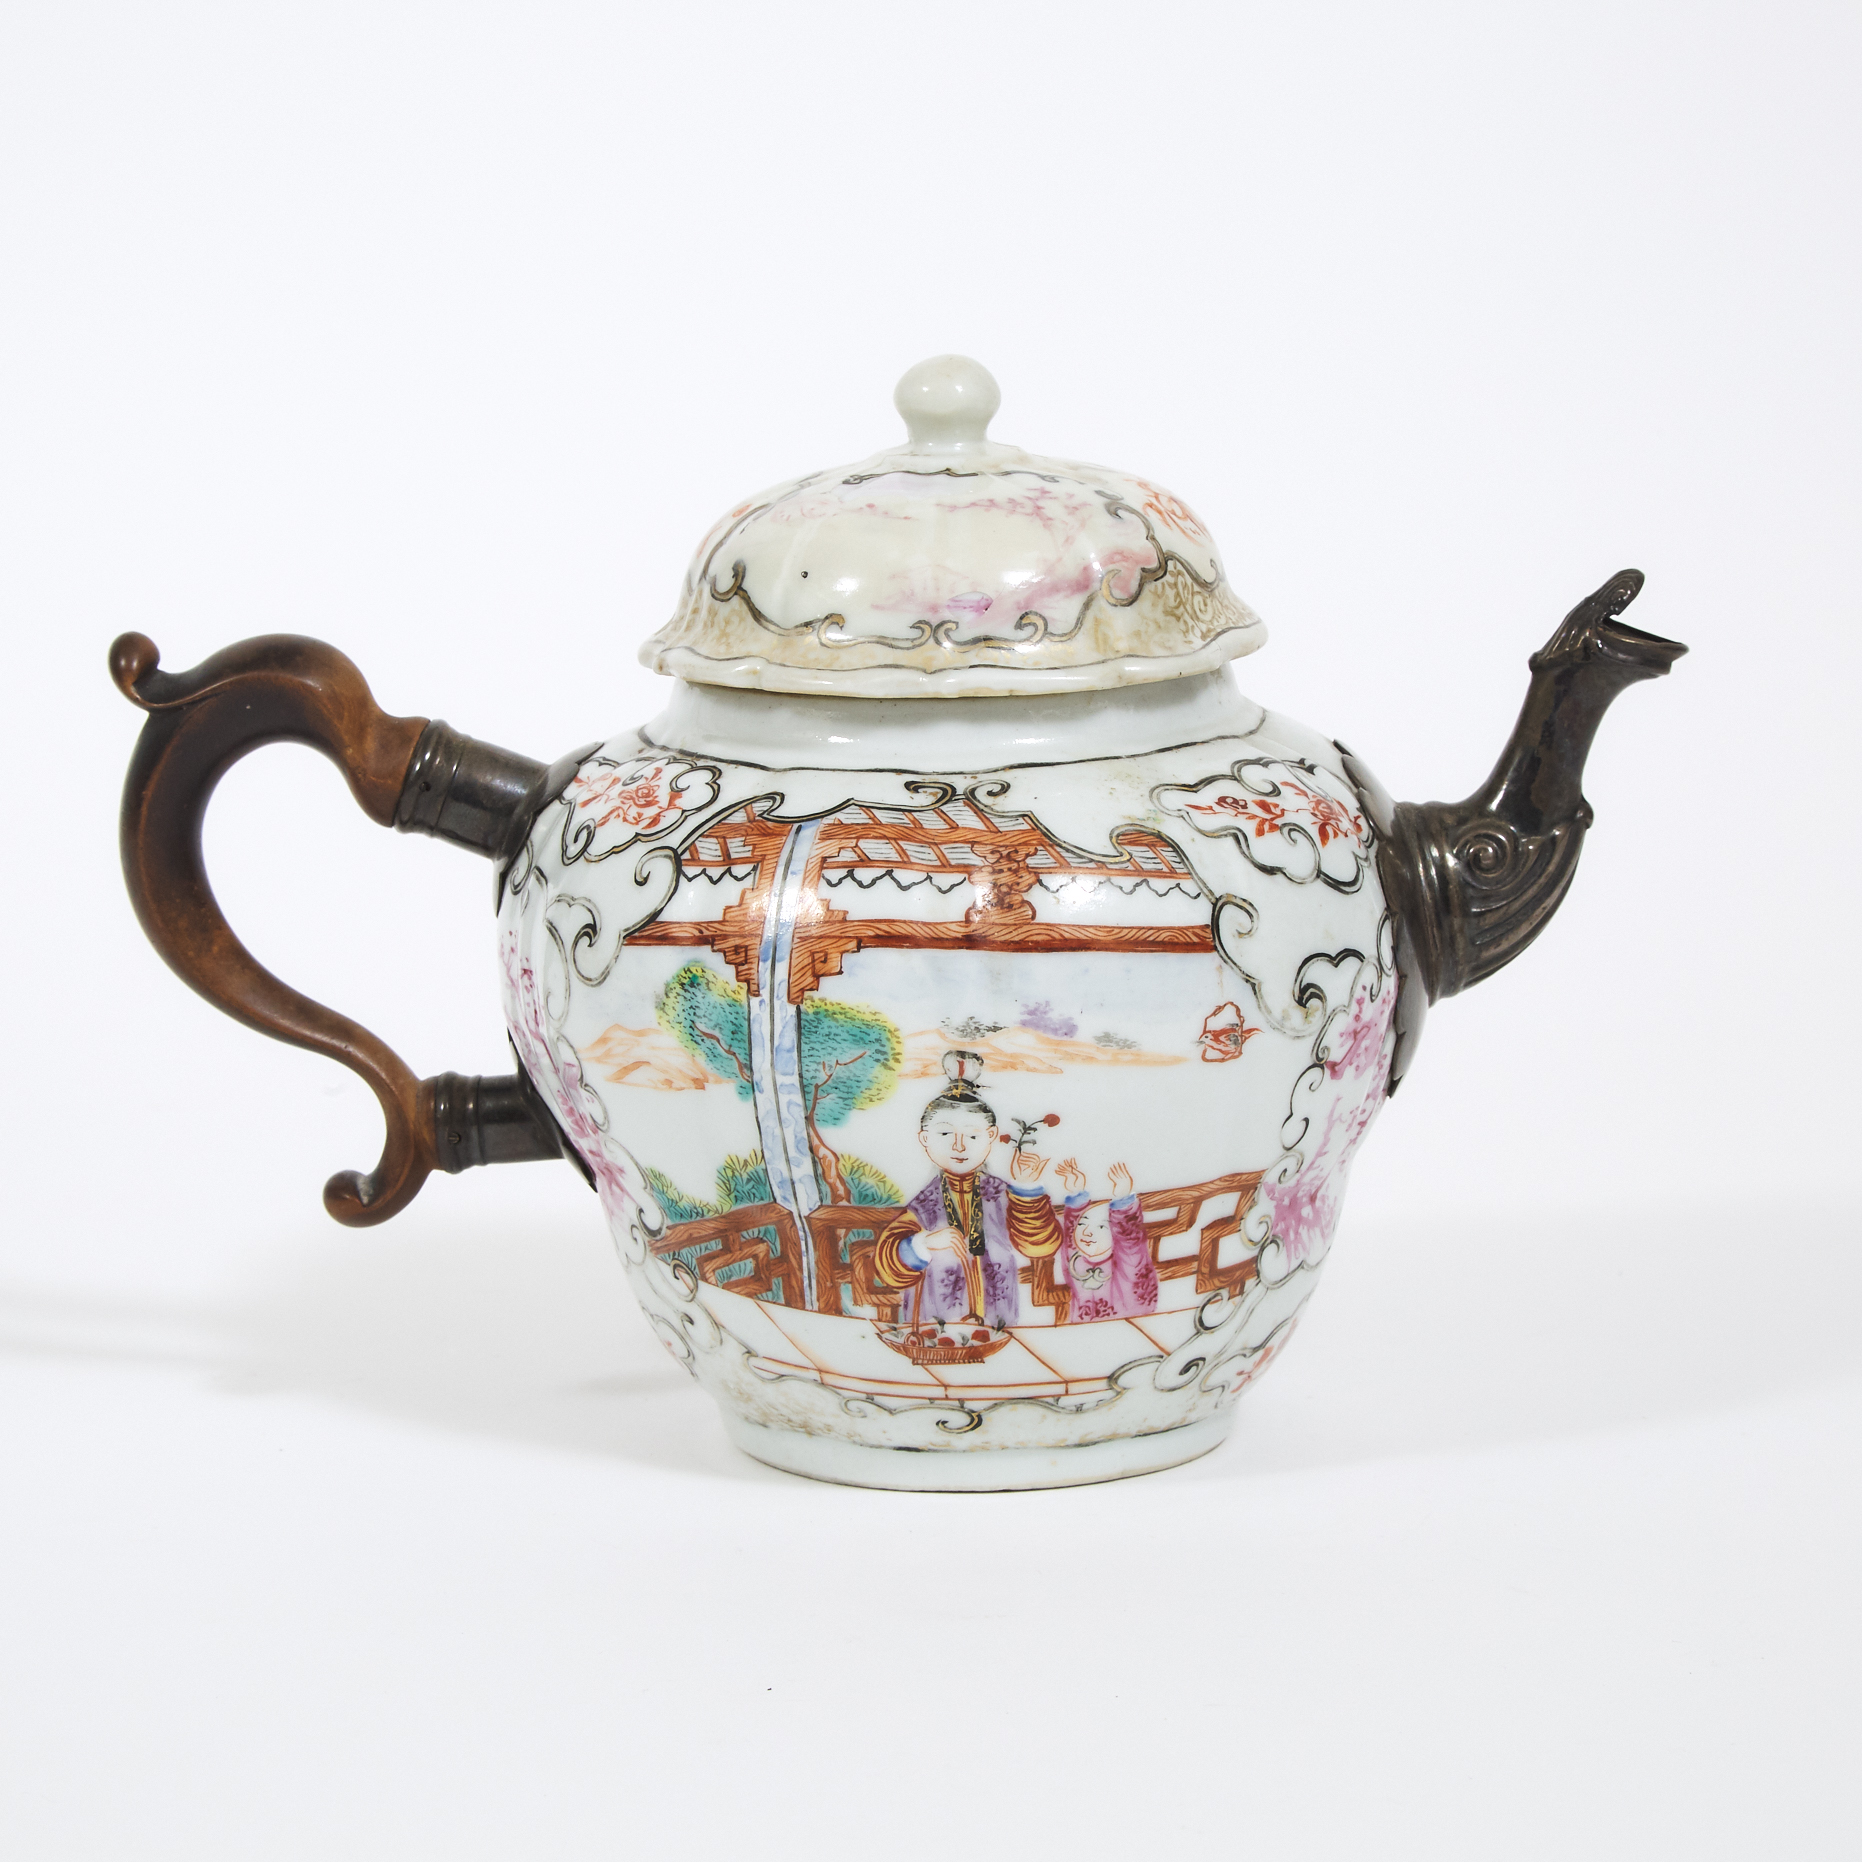 A Bronze-Mounted Chinese Export Famille Rose Teapot, Qianlong Period, 18th Century